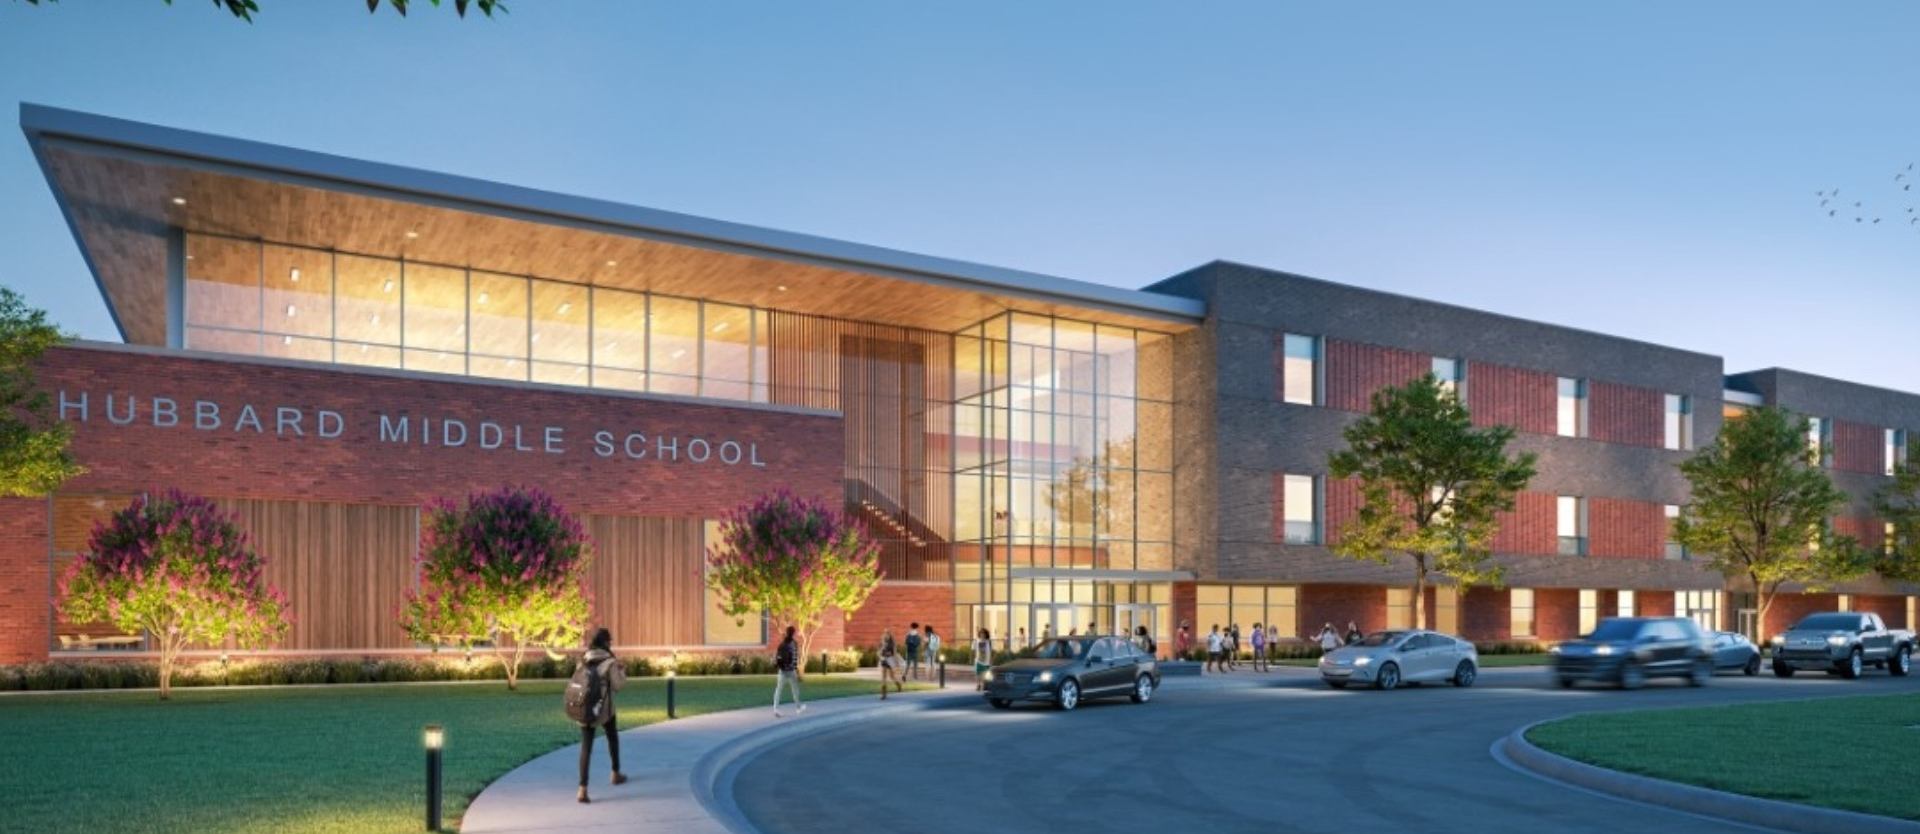 Architect rendering of 3 story middle school with students walking in front